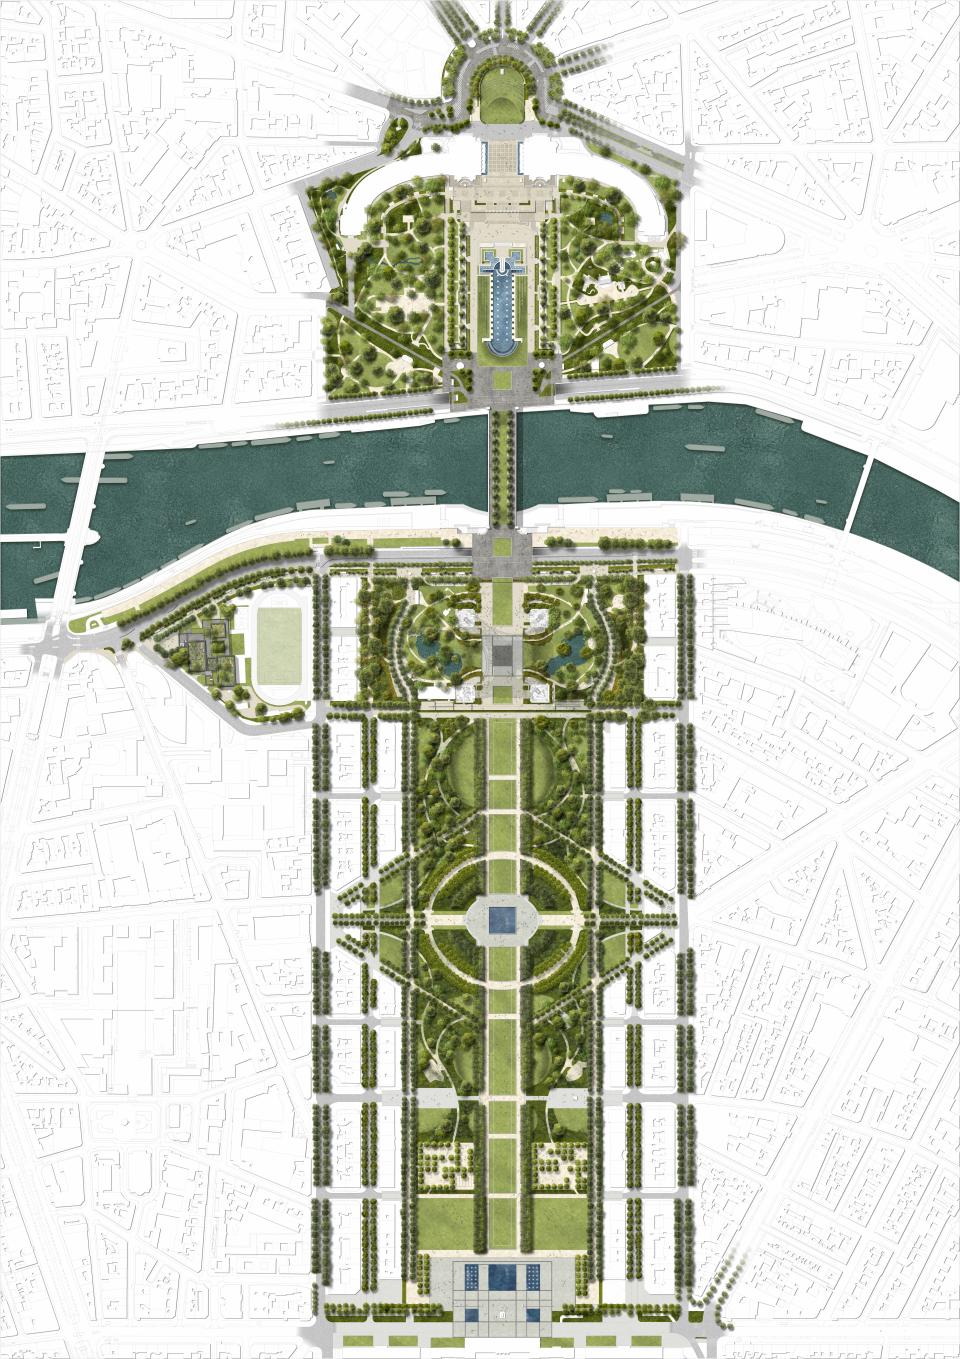 The new plan will link over a mile of Paris with green space.